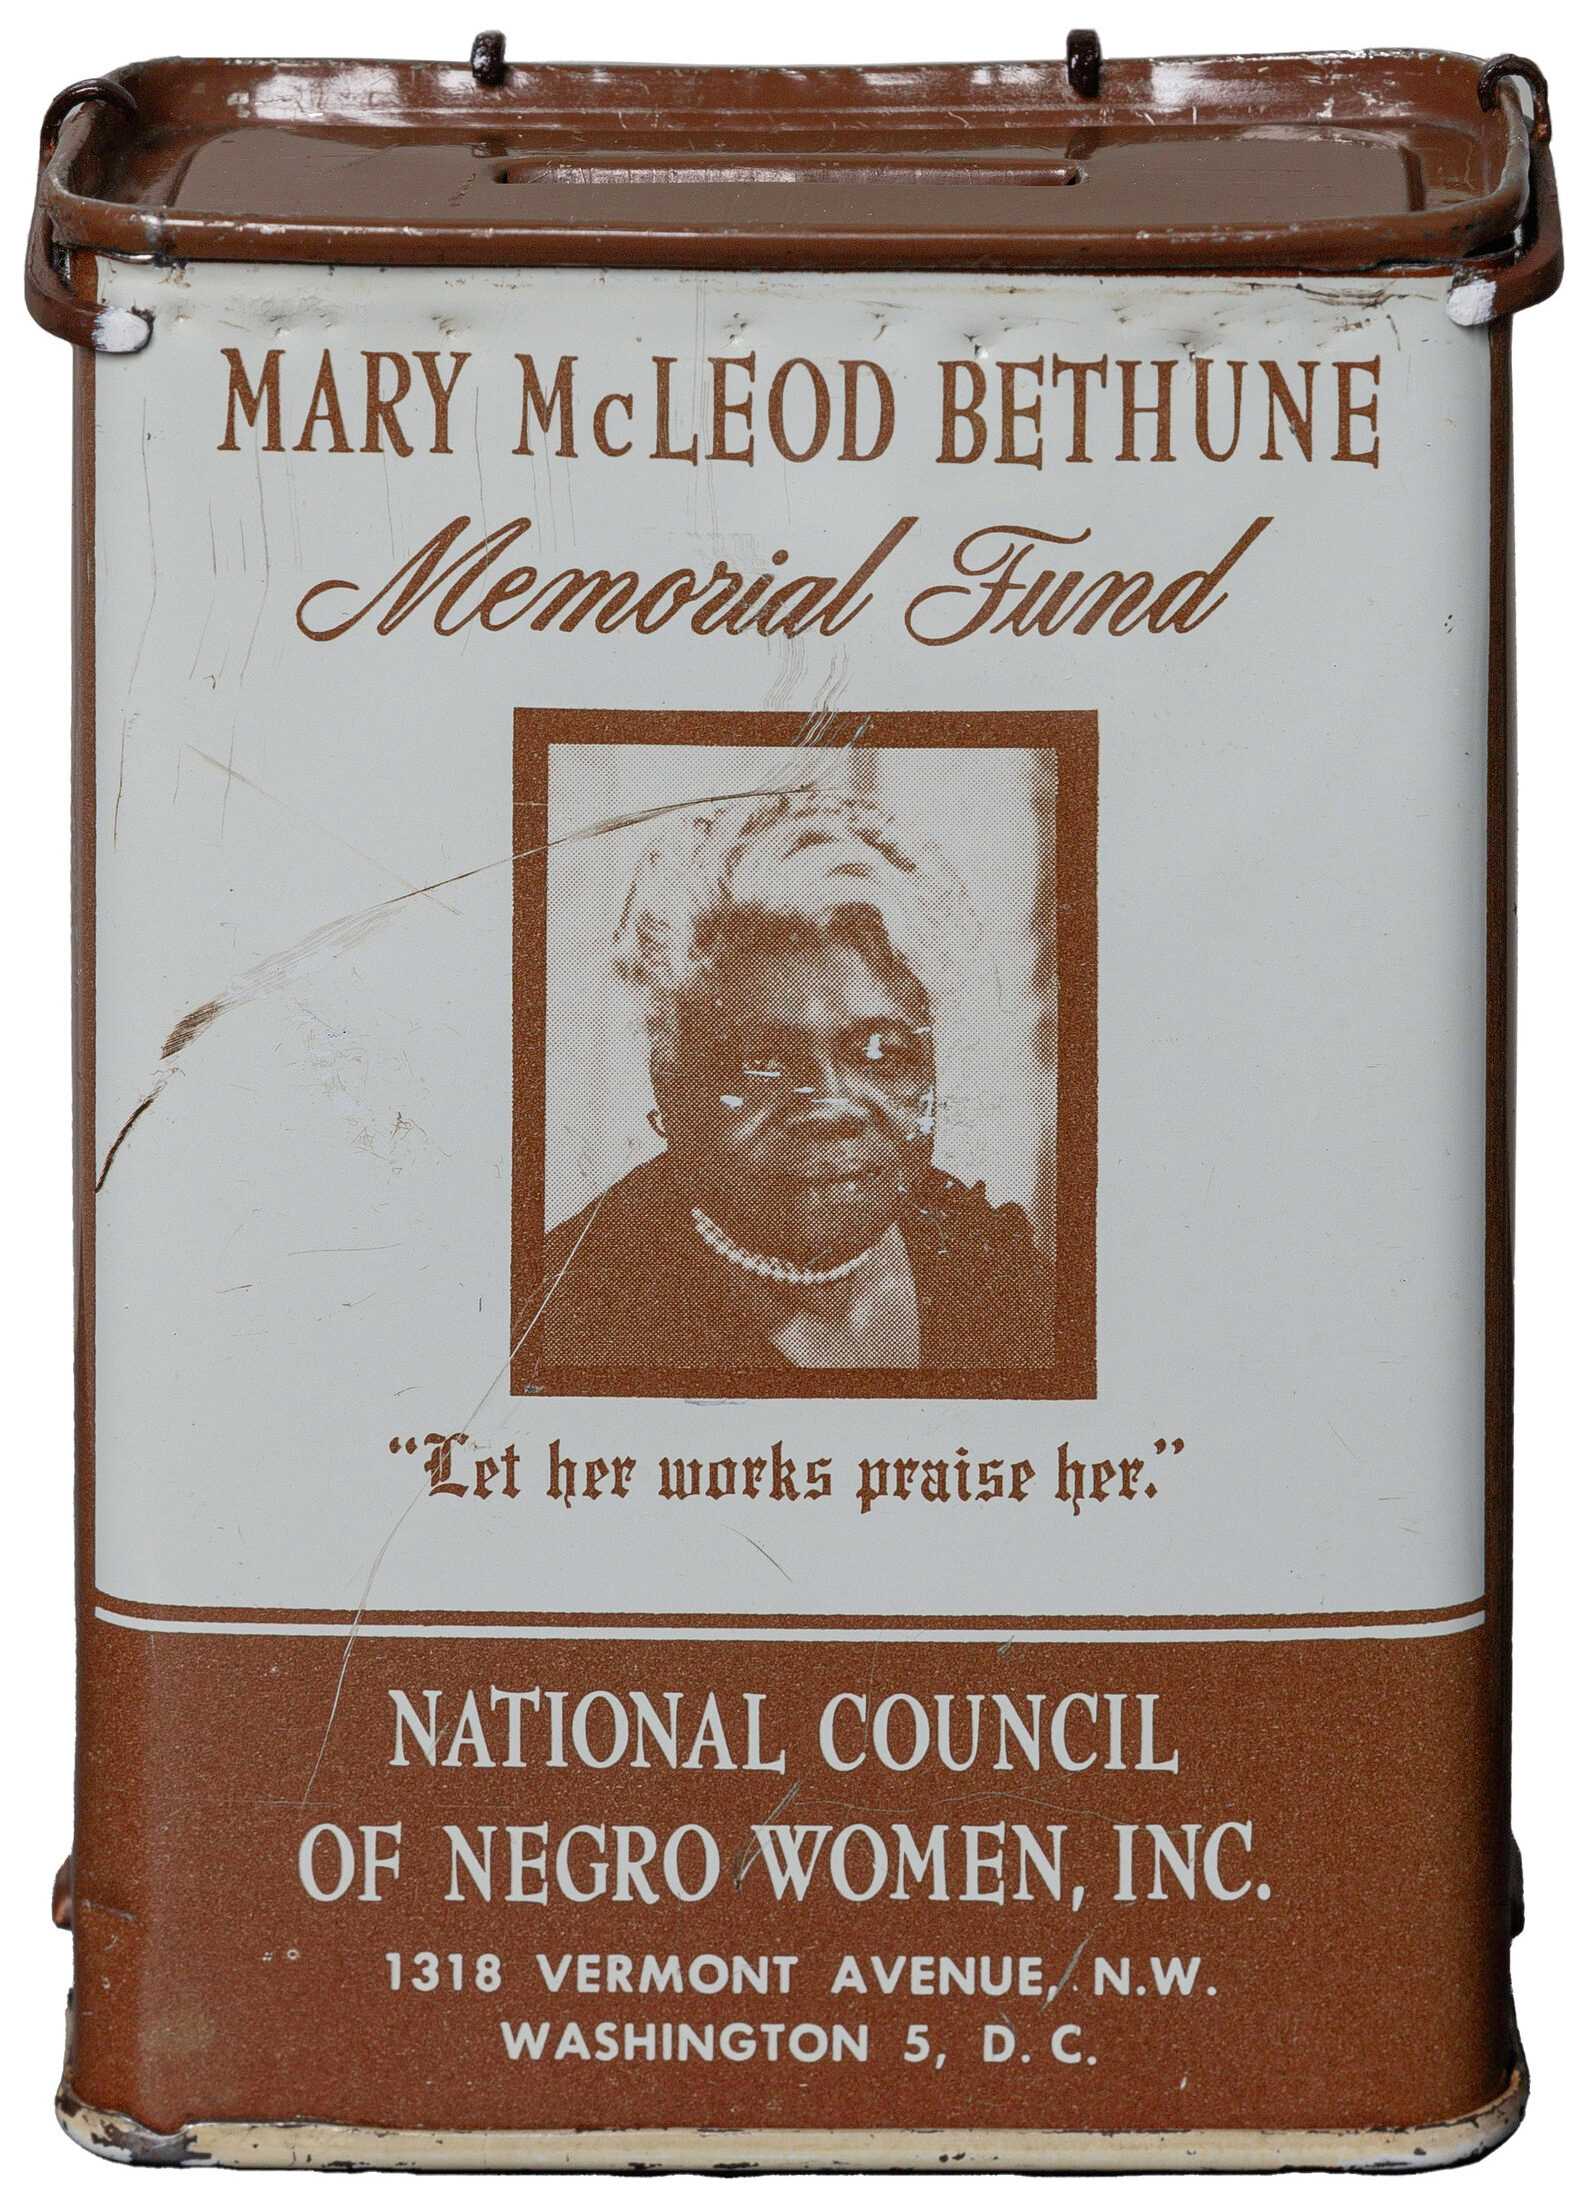 Image of National Council of Negro Women donation box for Mary McLeod Bethune Memorial Fund